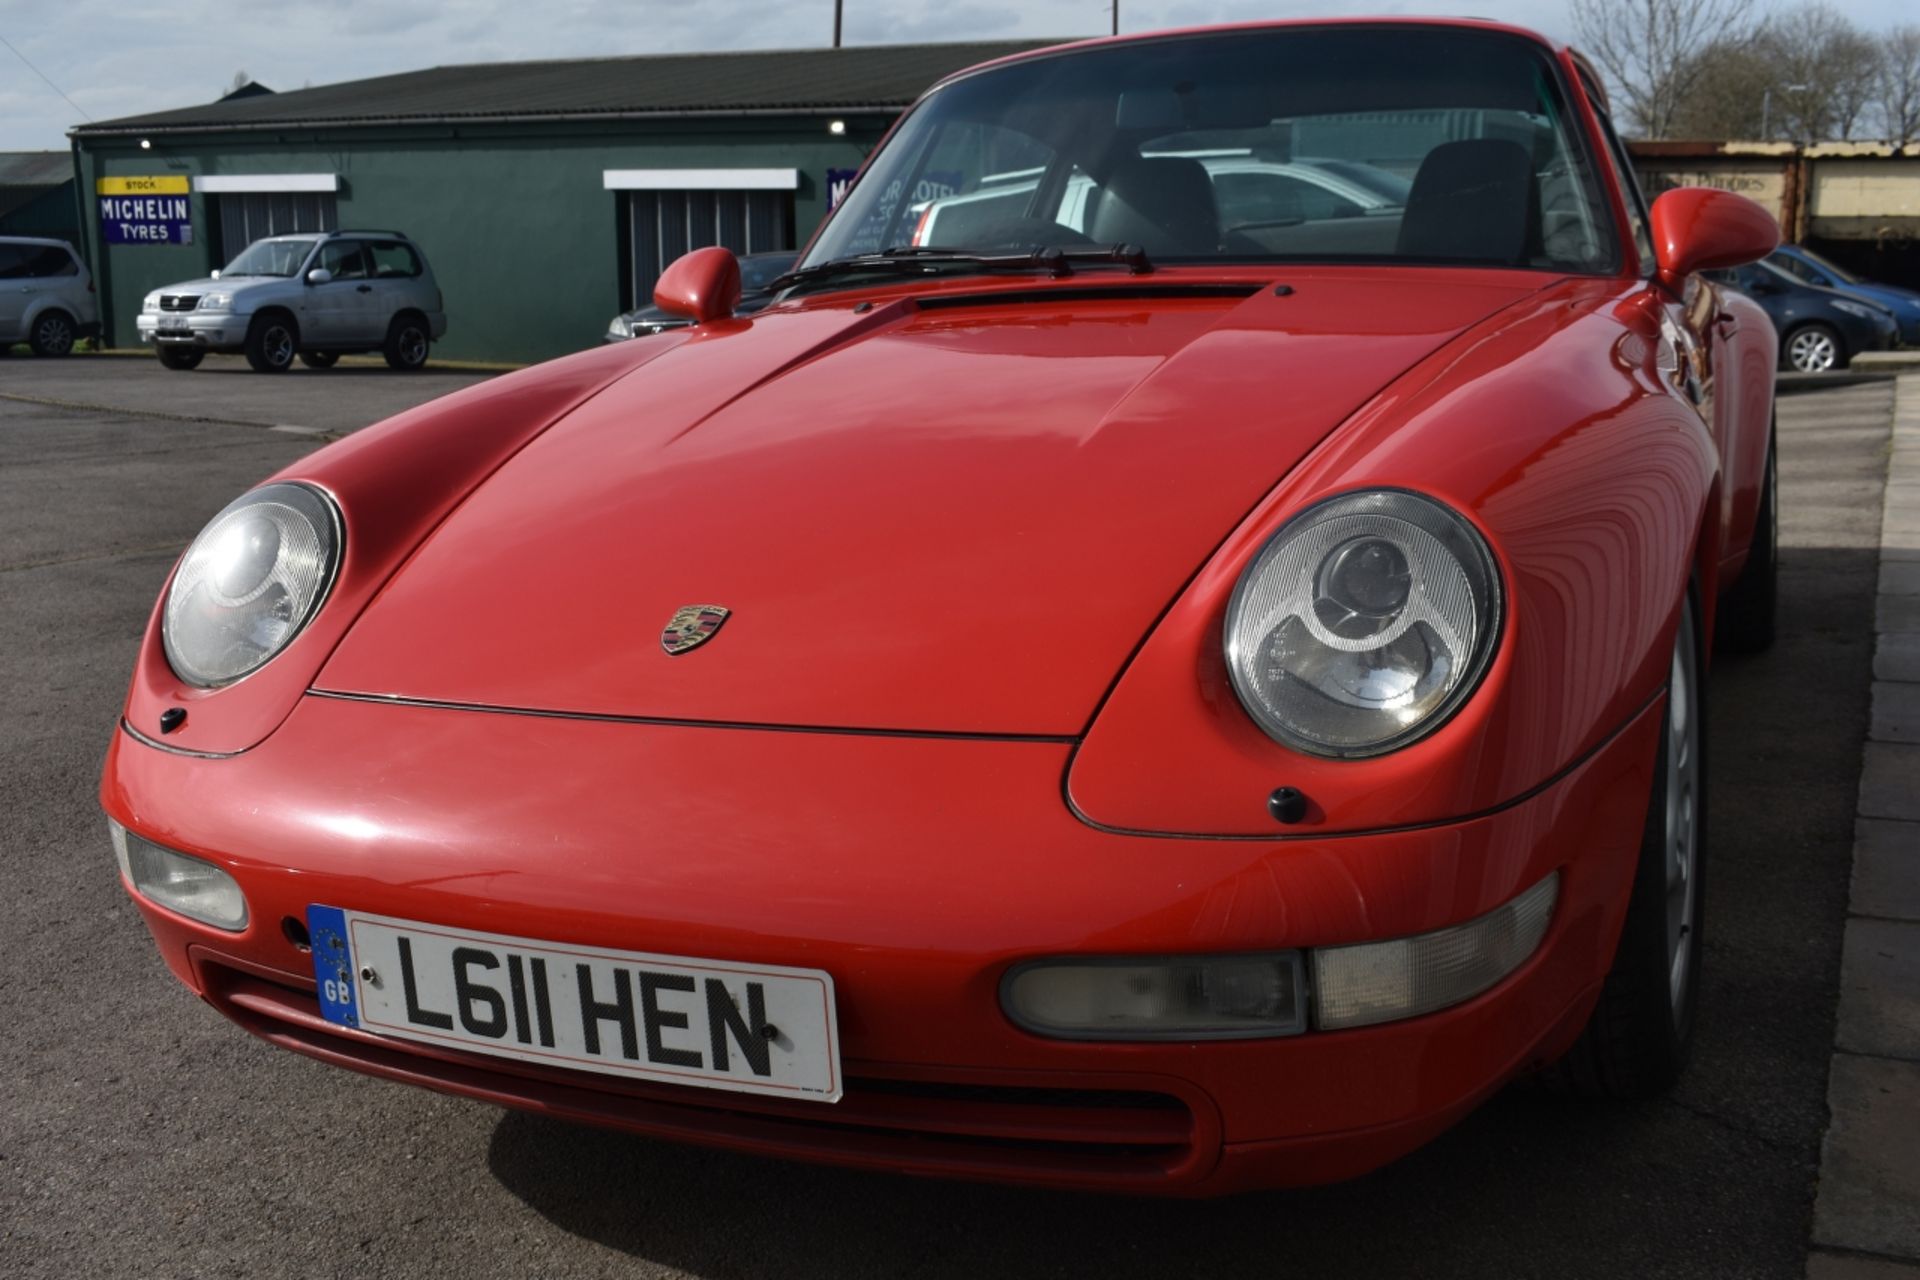 A 1993 Porsche 911 (993) Carrera Coupe Registration number L611 HEN Chassis number WPOZZZ99ZRS311060 - Image 99 of 113